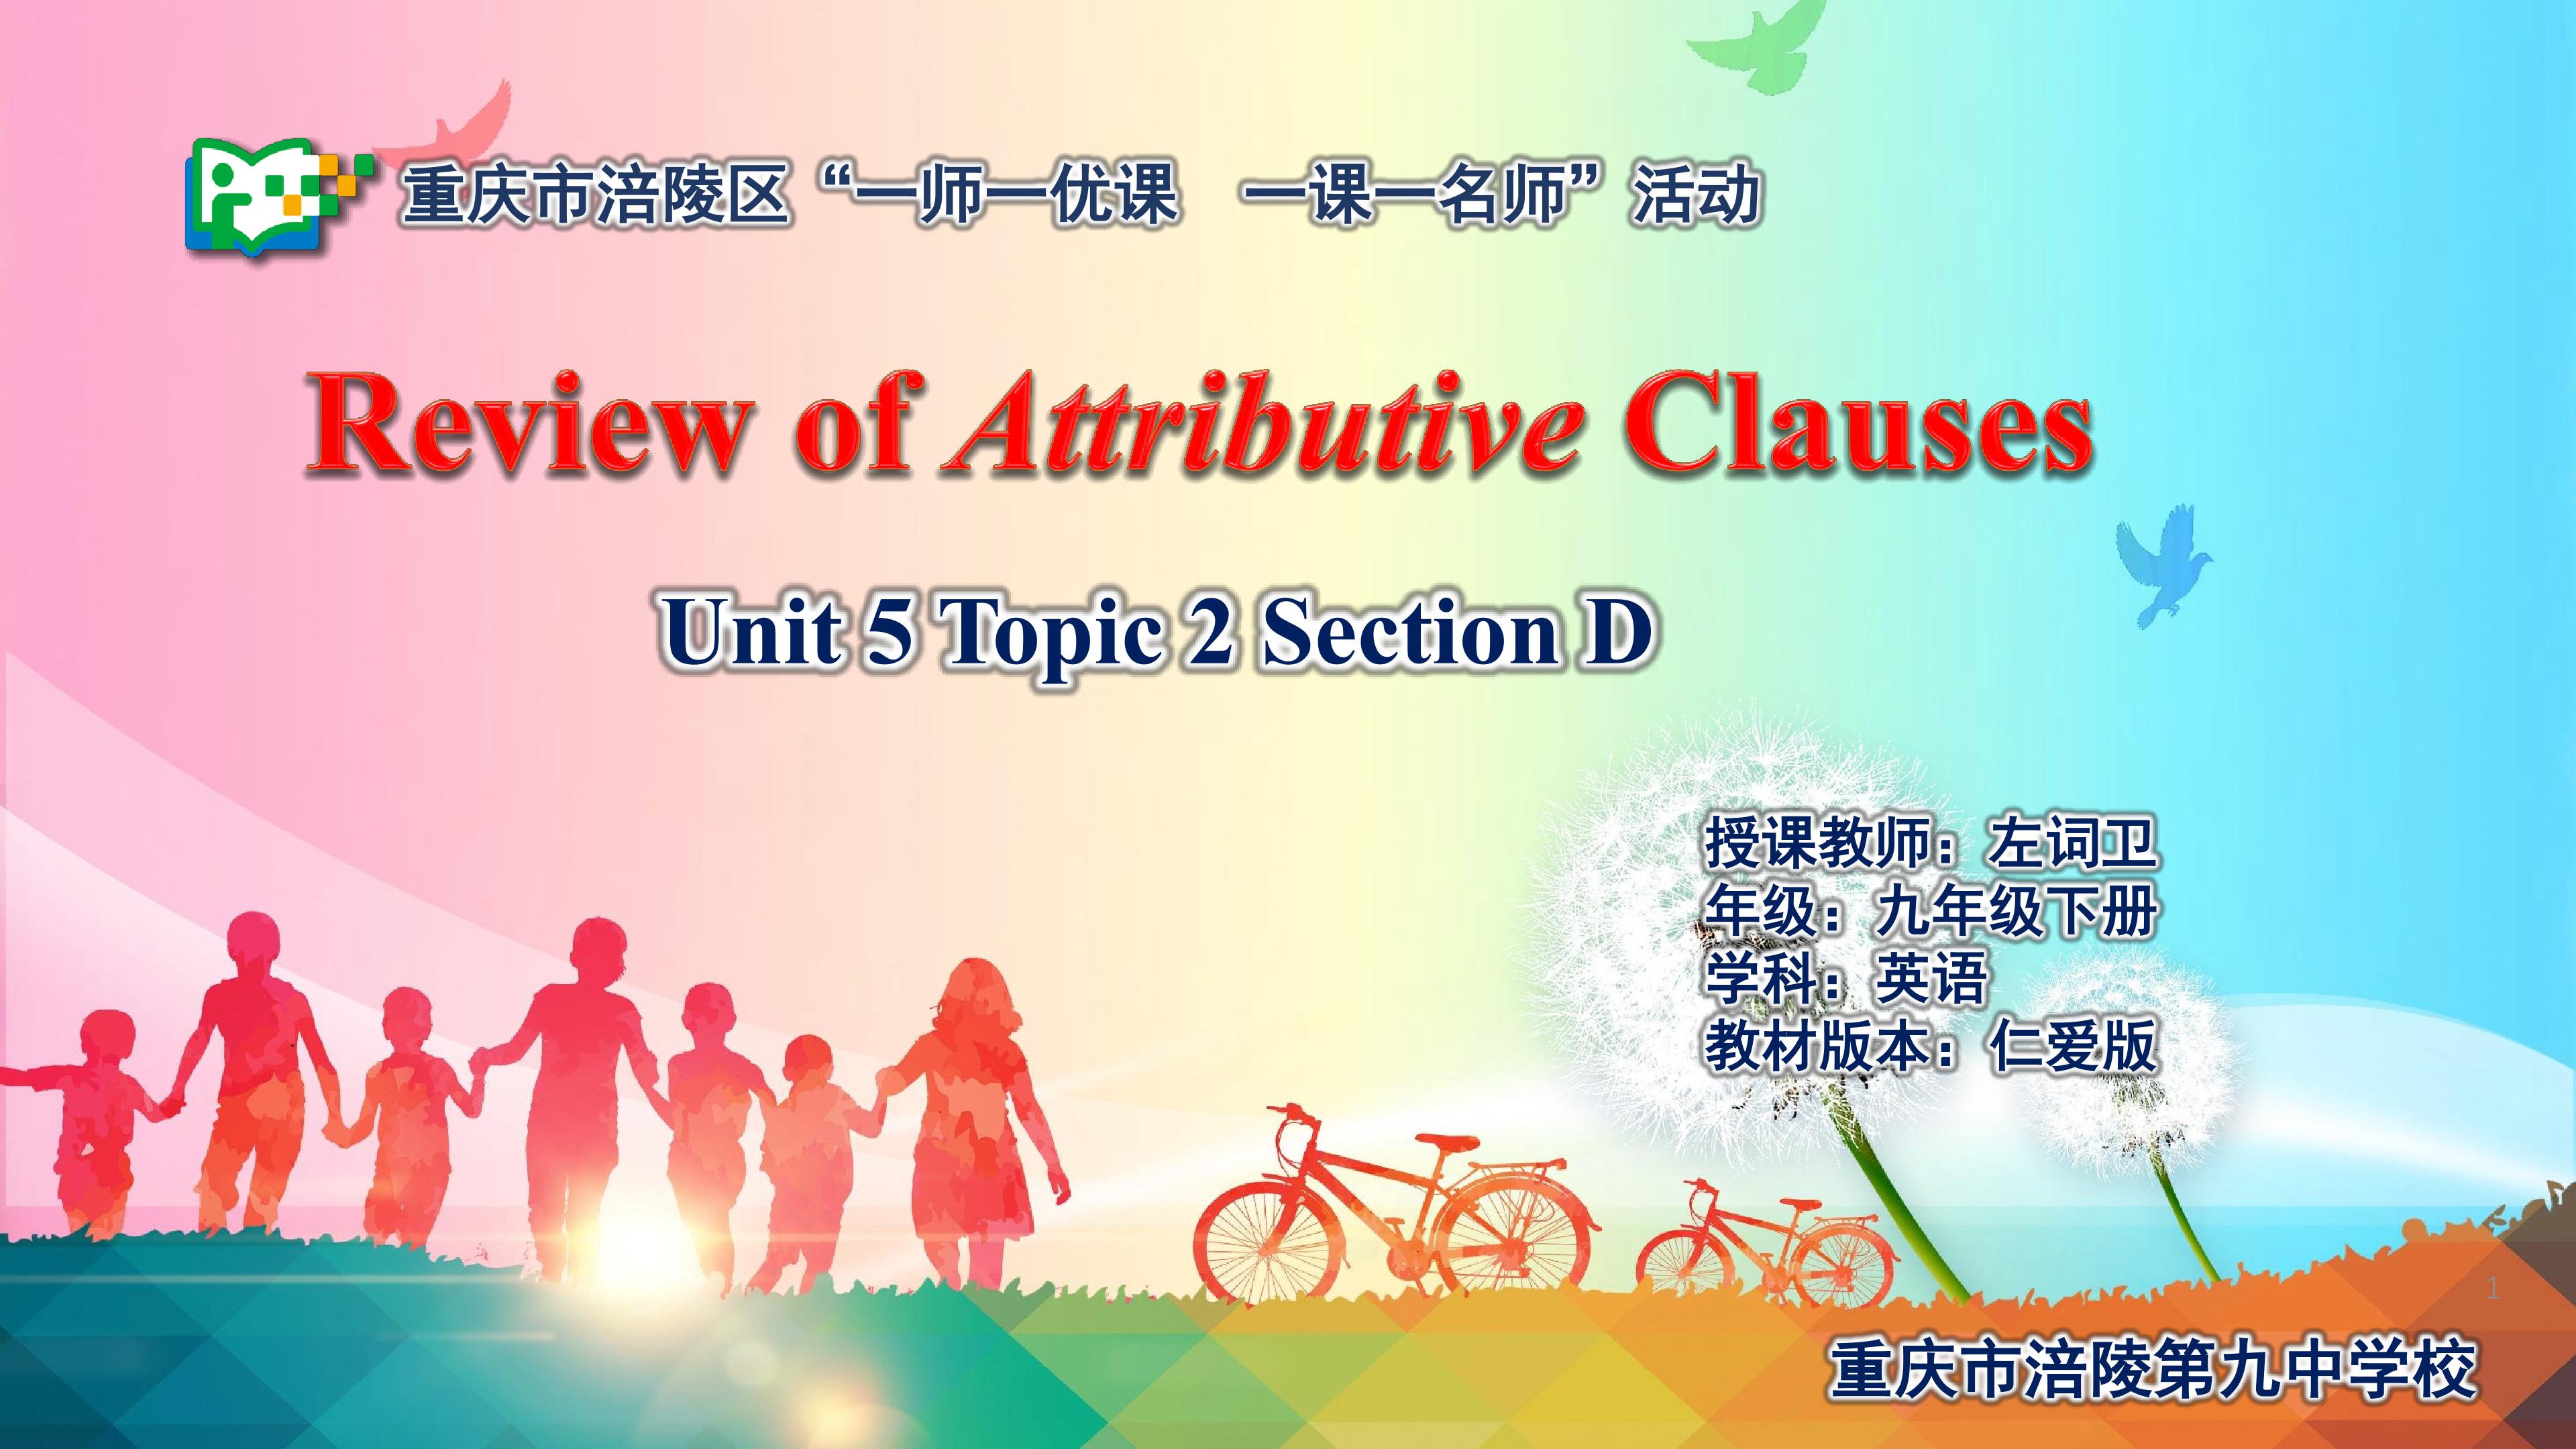 Review of Attributive Clauses